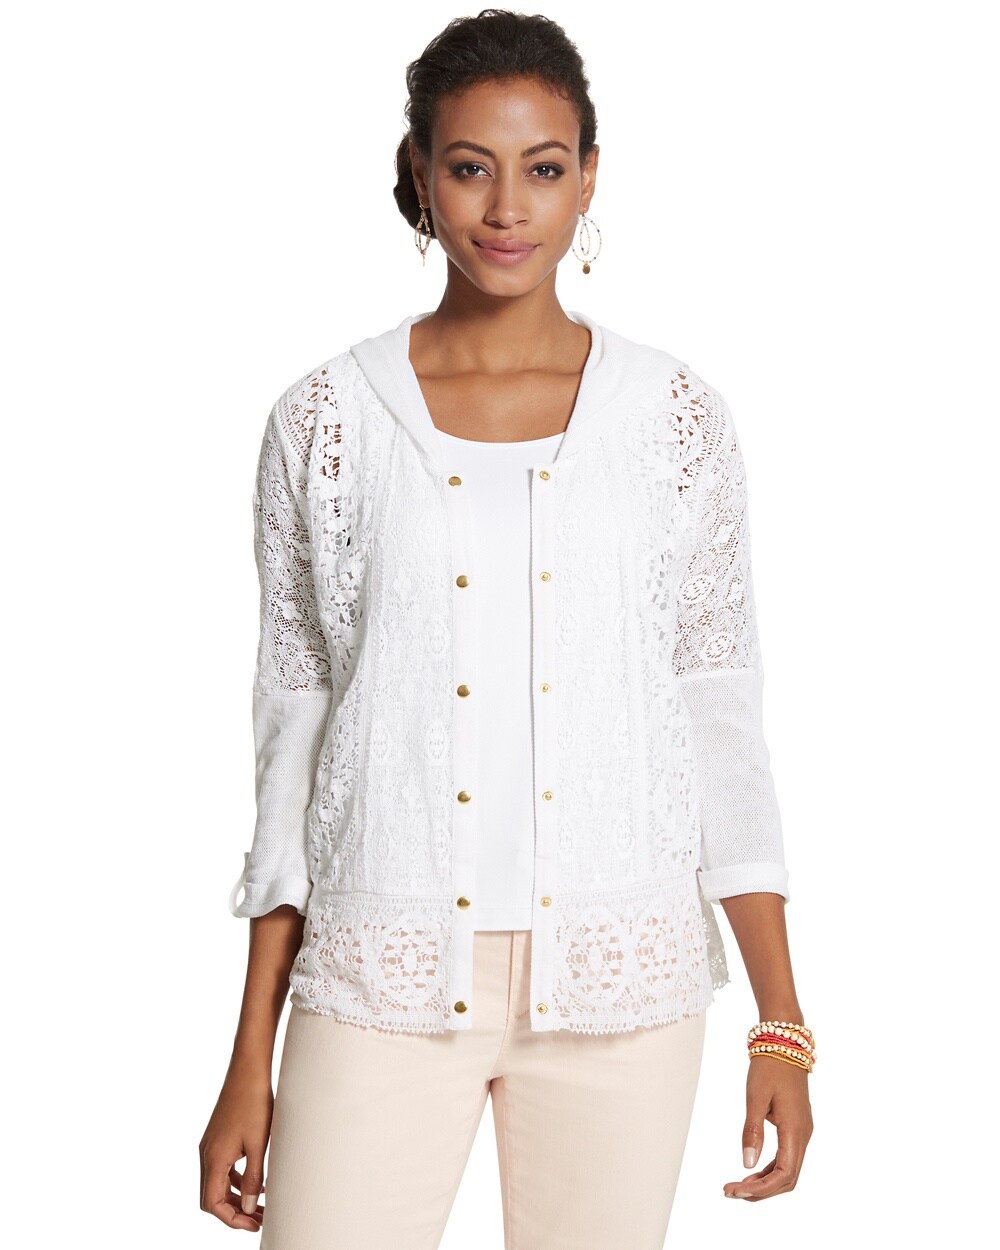 Lace Hooded Jacket - Chico's